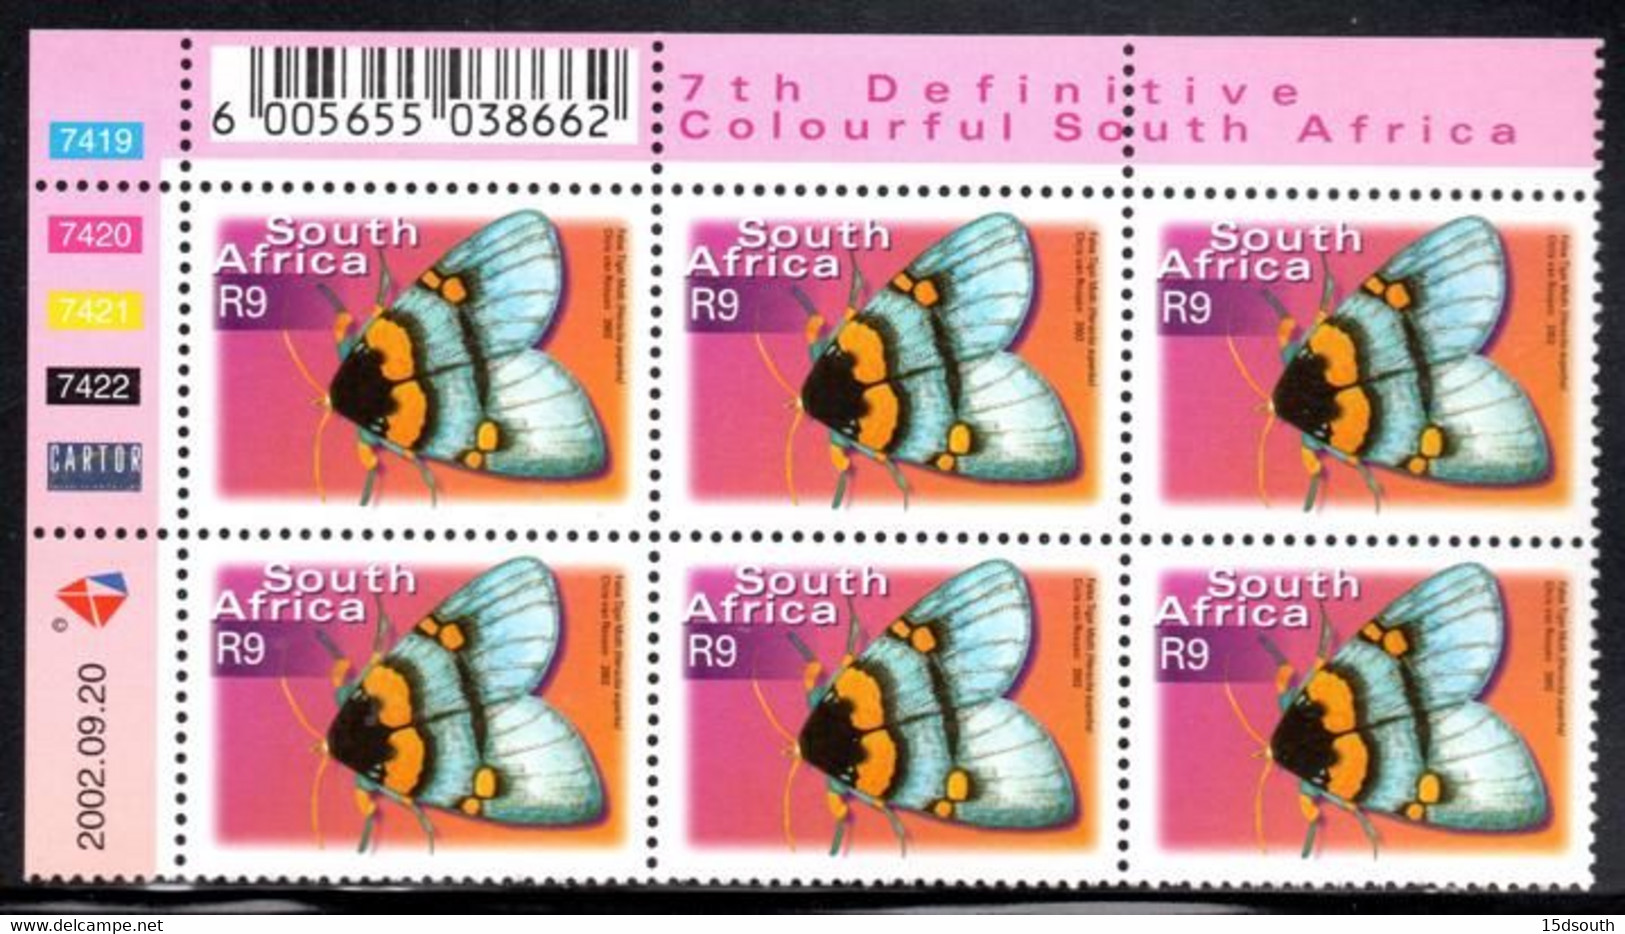 South Africa - 2002 7th Definitive Fauna And Flora R9 Moth Control Block (**) (2002.09.20) - Blocs-feuillets